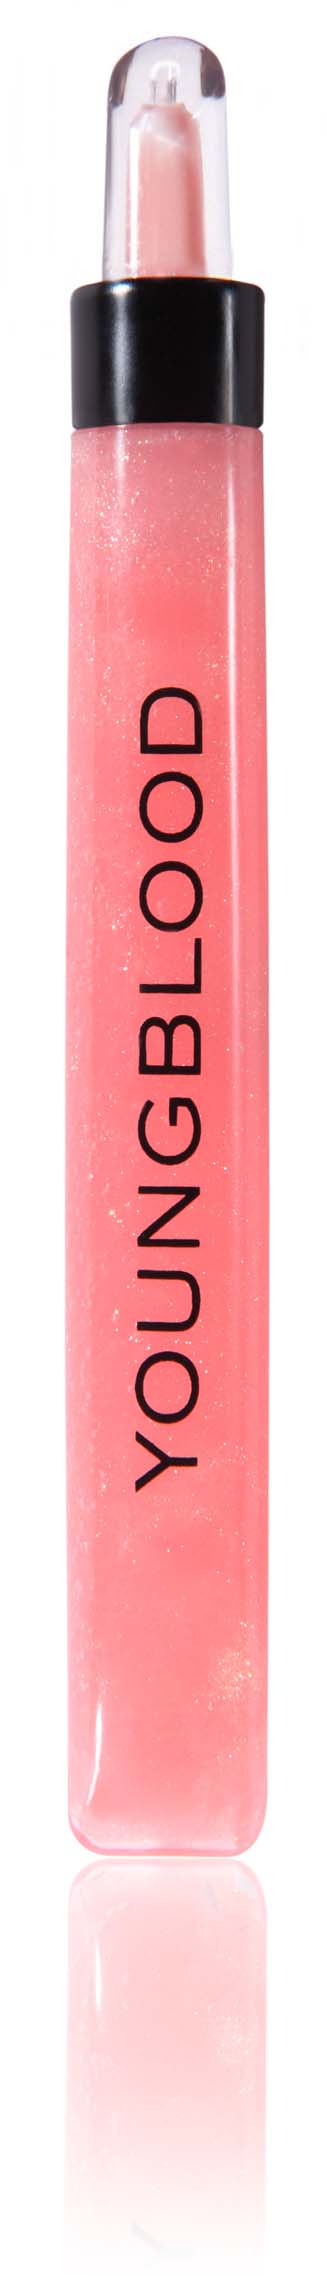 Youngblood Mighty Shiny Lip Gel 01 Revealed